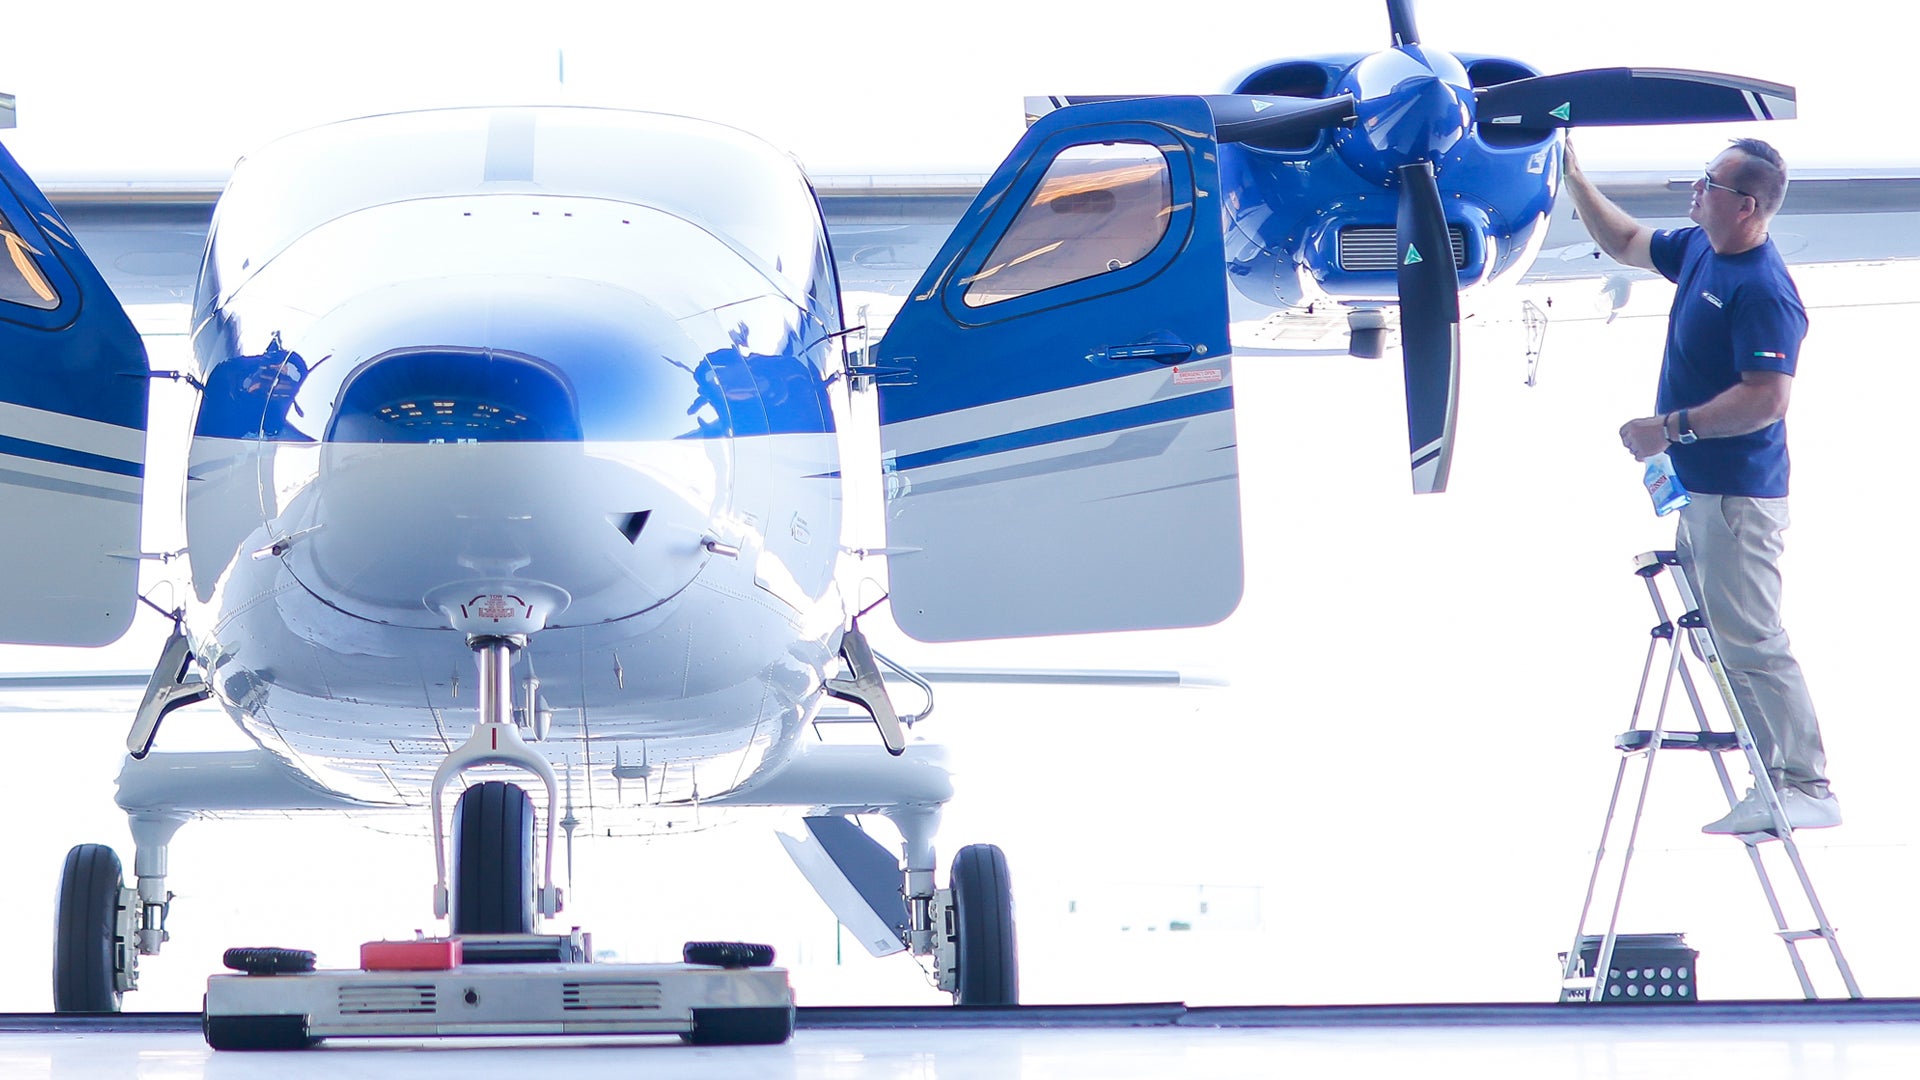 Tecnam Introduces P2012 STOL To Serve Challenging, Remote Airports